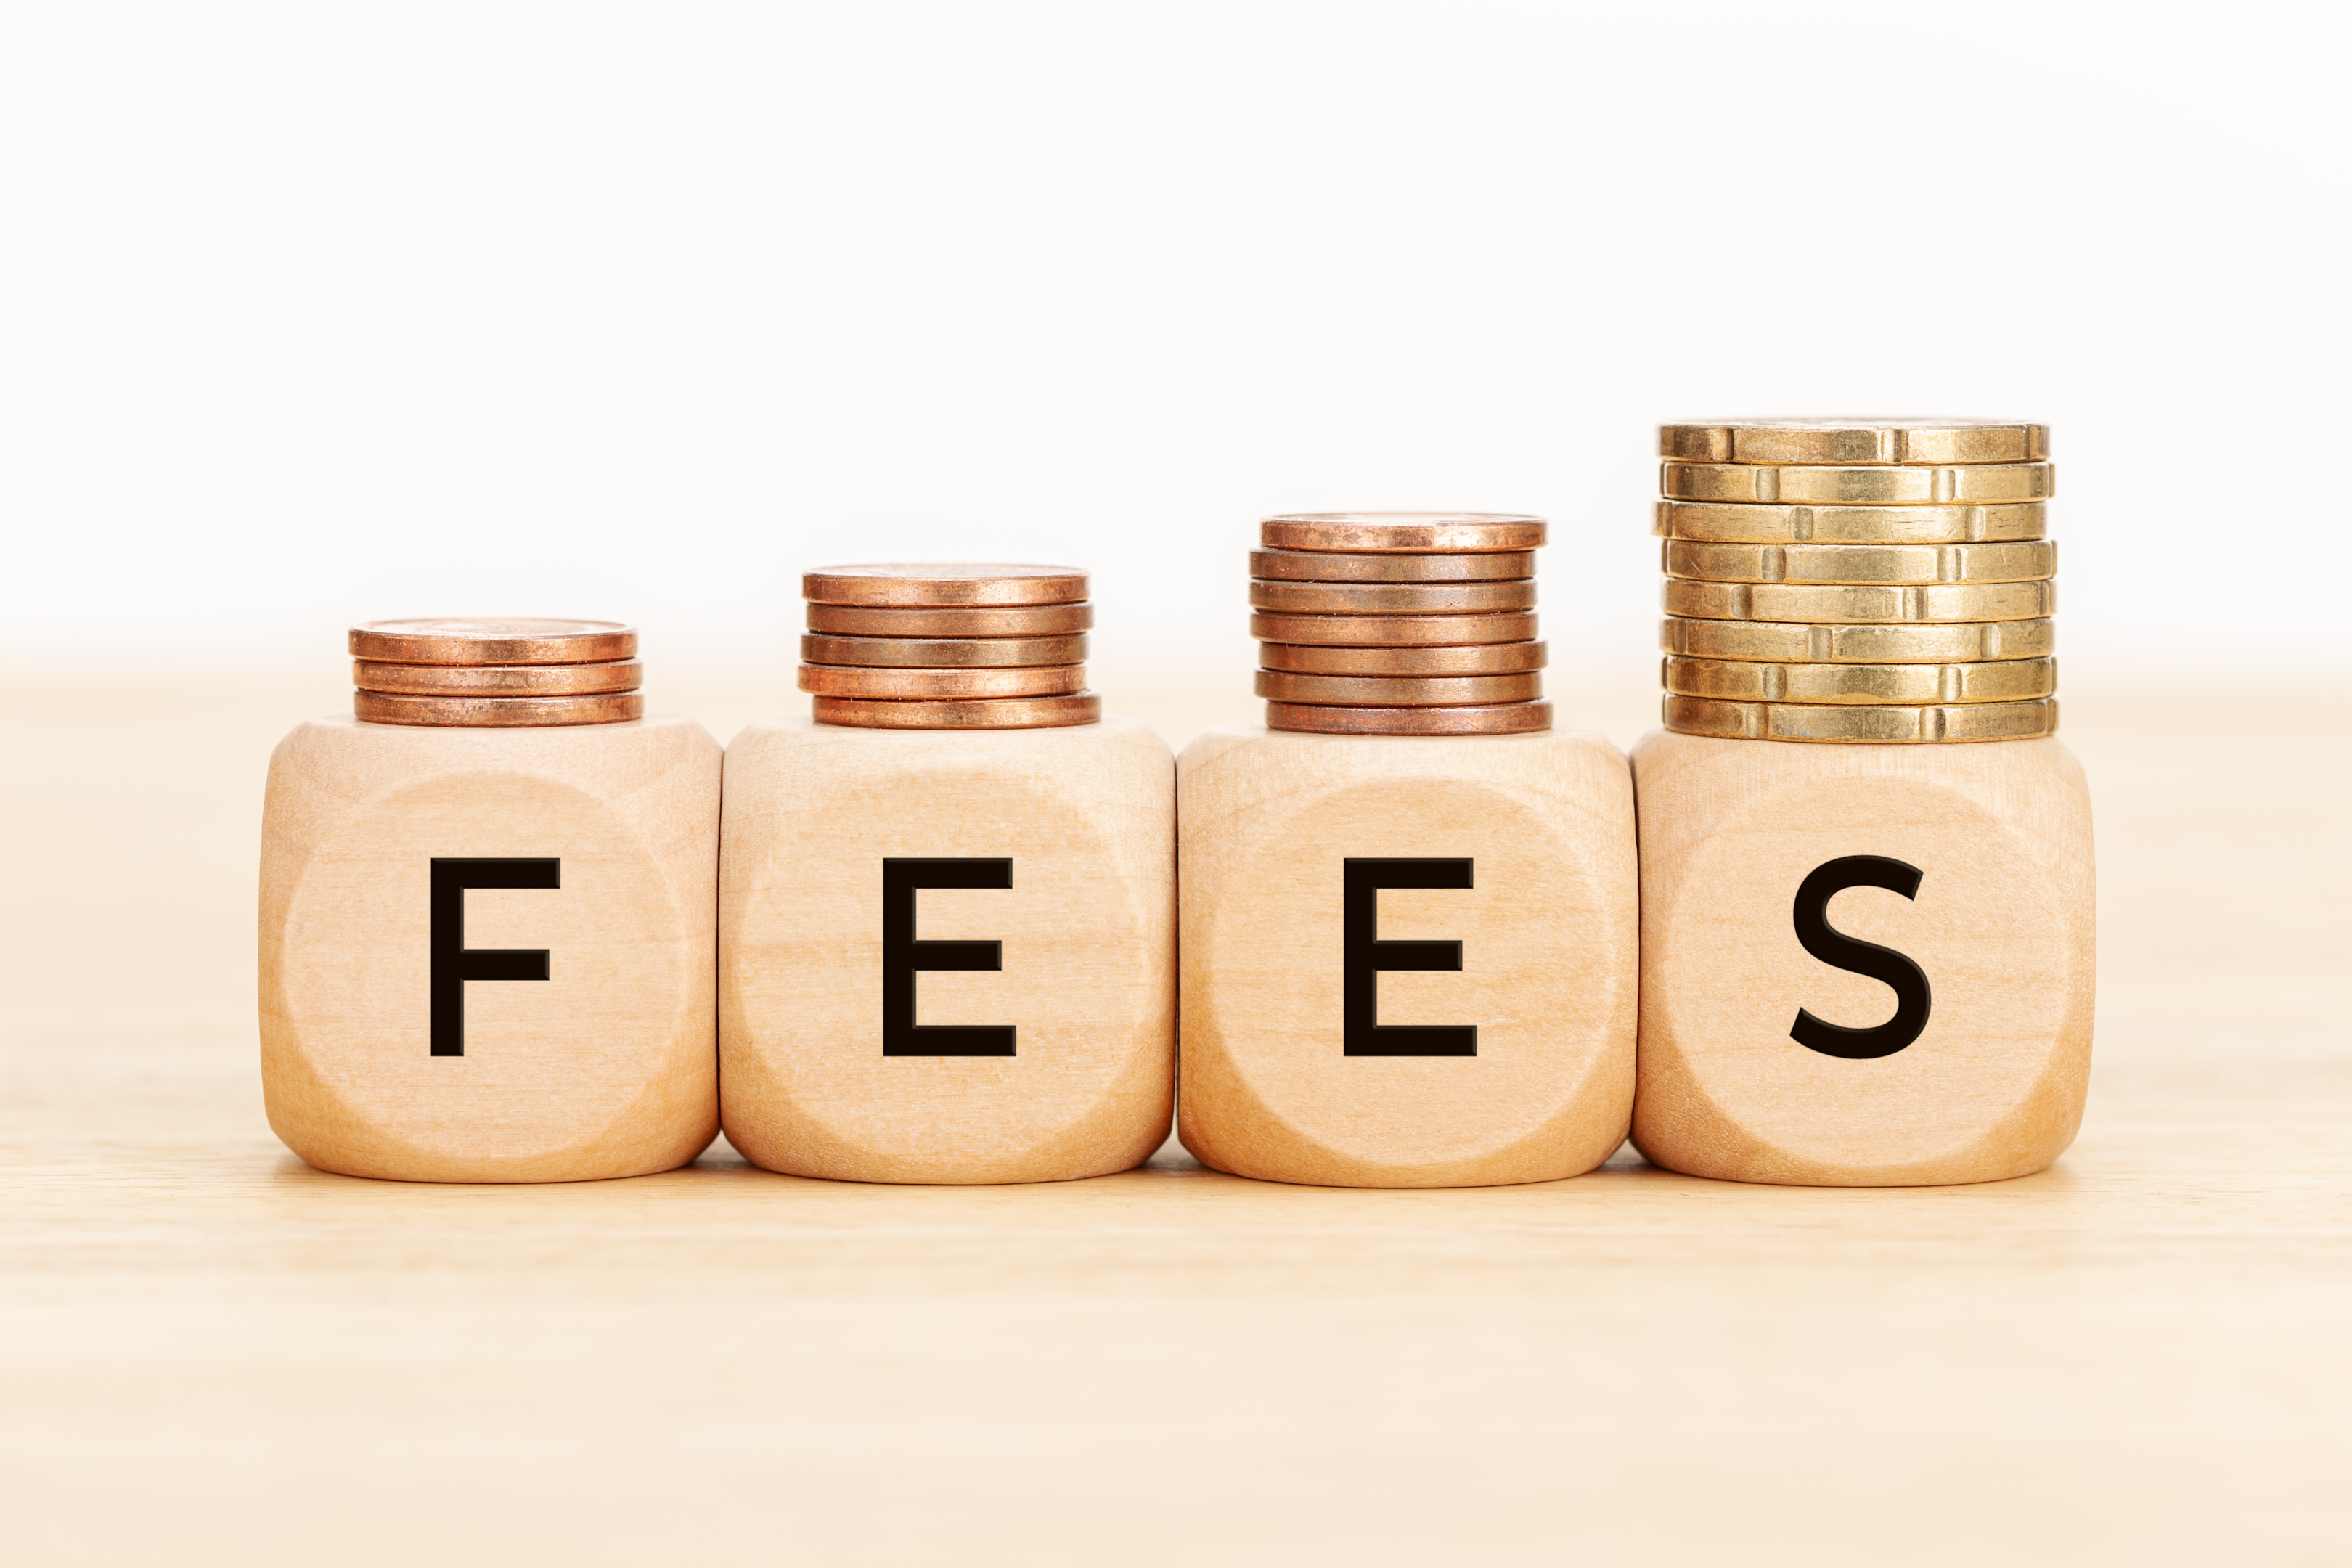 If the appropriate agency has determined adversely against the landlord, a tenant may be entitled to recovery of fees for the lessor's conduct. Appropriate documents would need to be filed to prove up these fees.